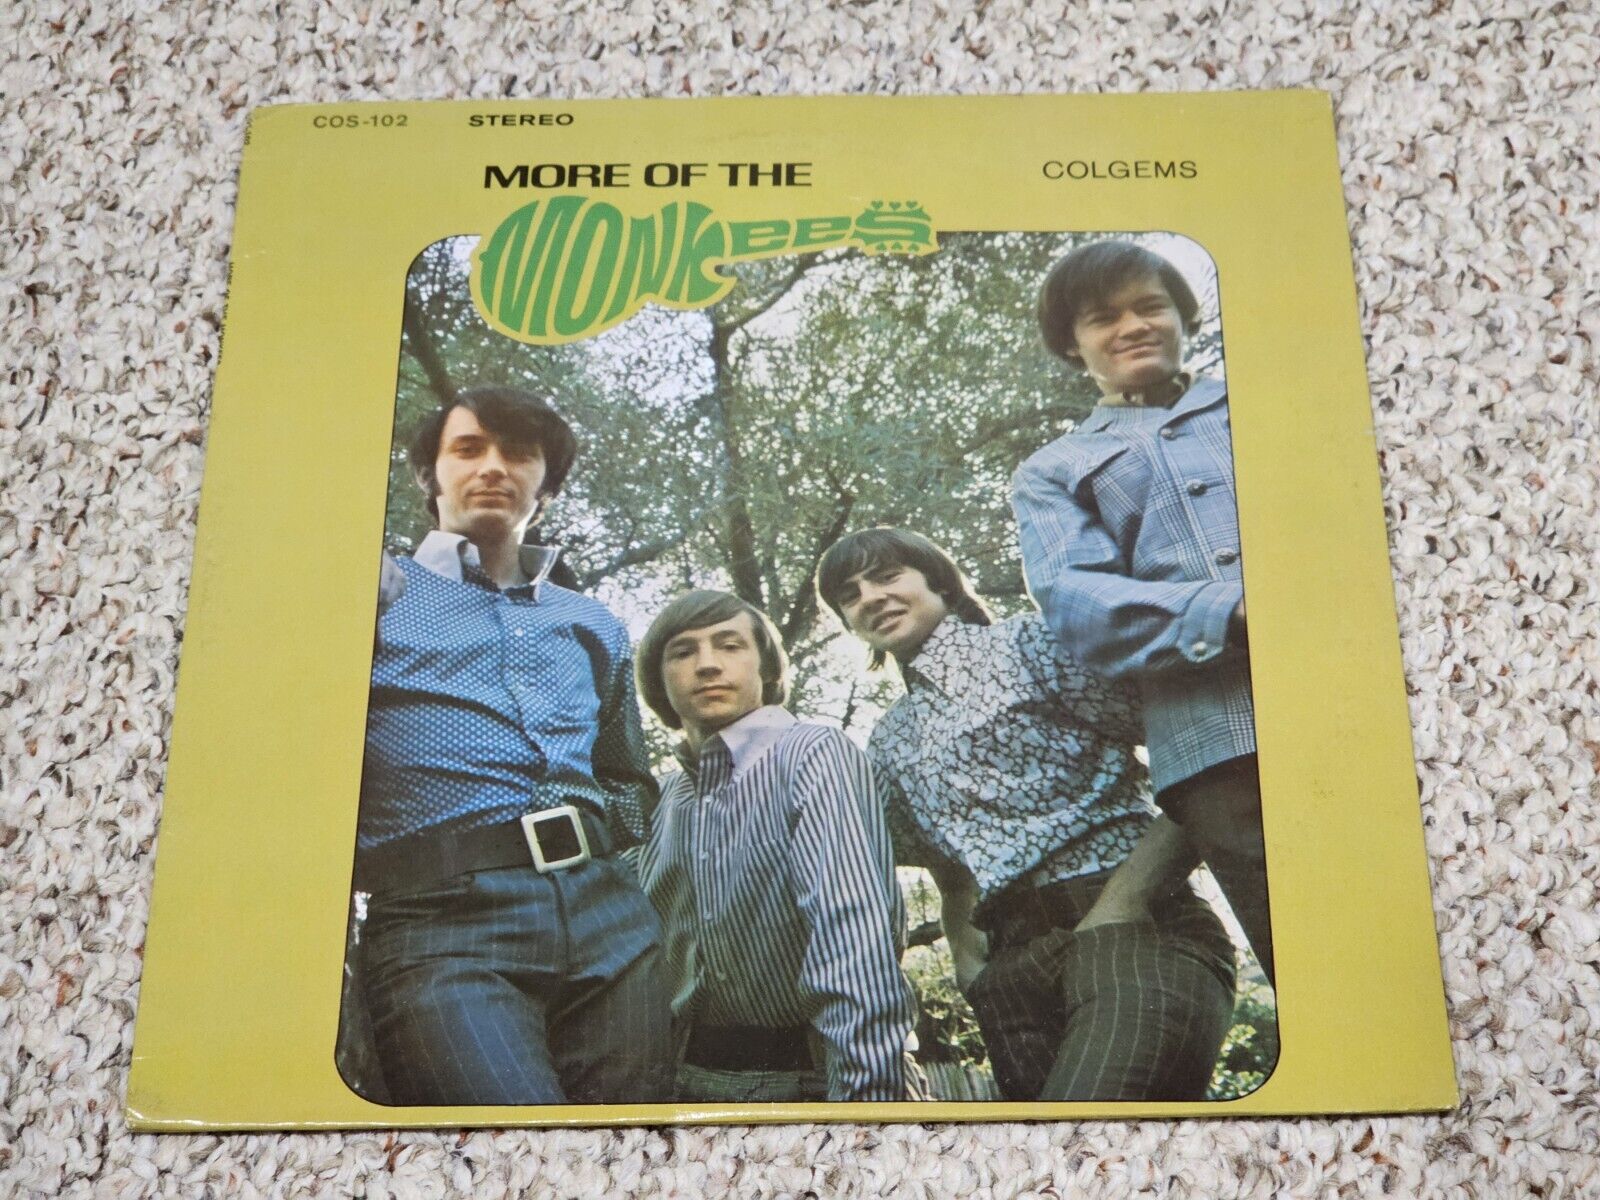 MORE OF THE MONKEES 1969  Pressing Stereo Colgems COS-102 RE Vinyl LP